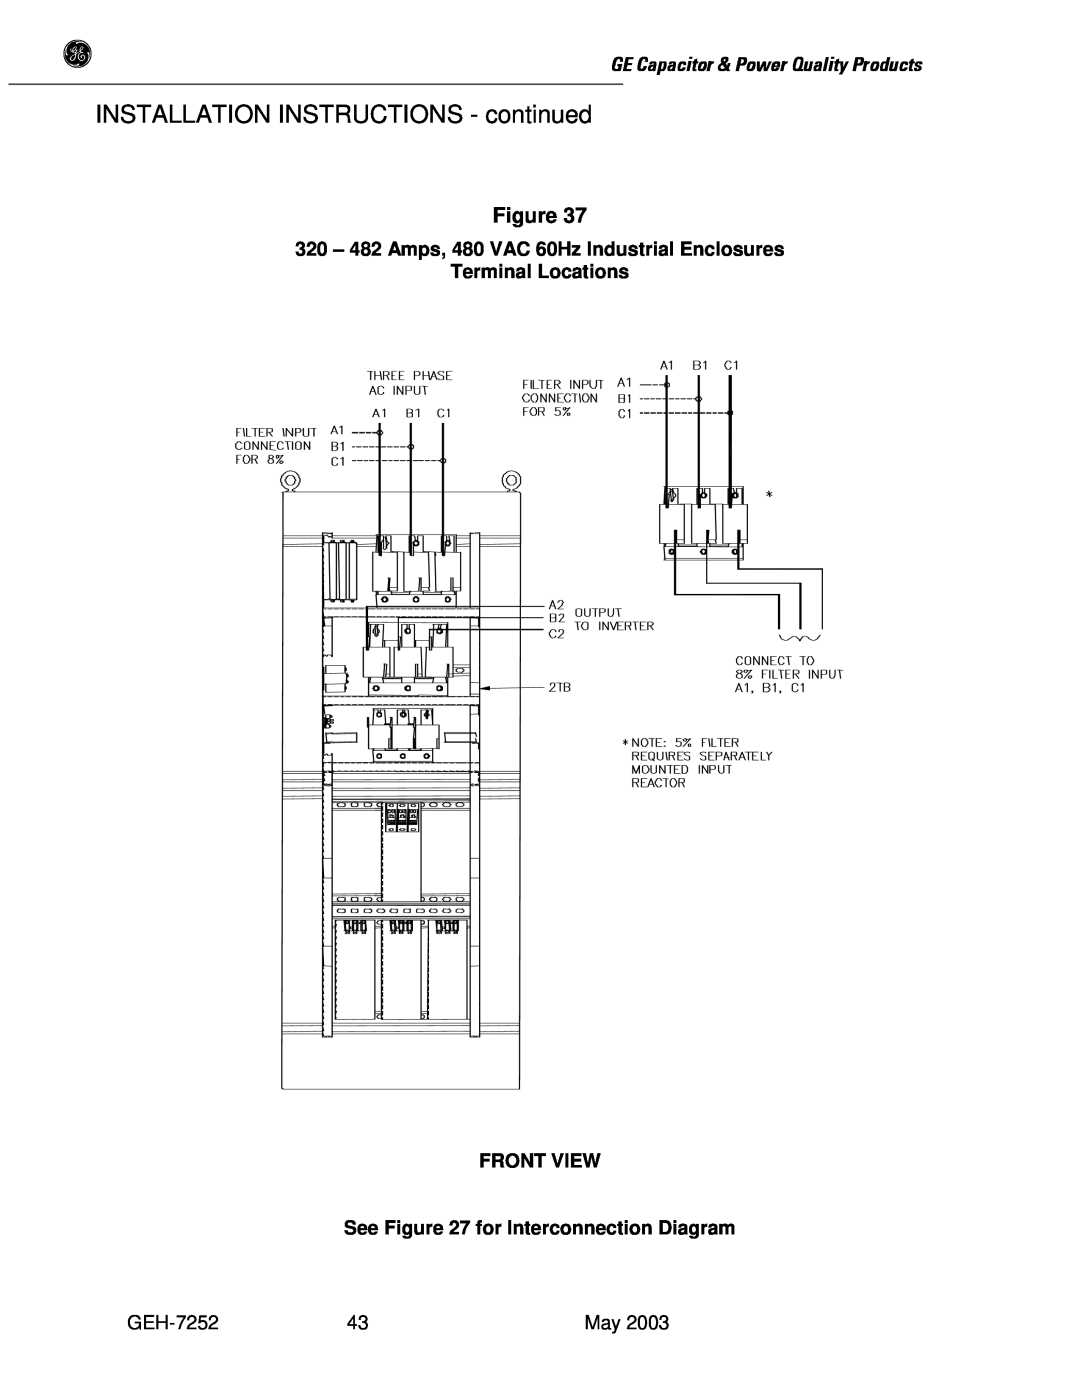 GE SERIES B 480 user manual INSTALLATION INSTRUCTIONS - continued, GE Capacitor & Power Quality Products, GEH-7252 